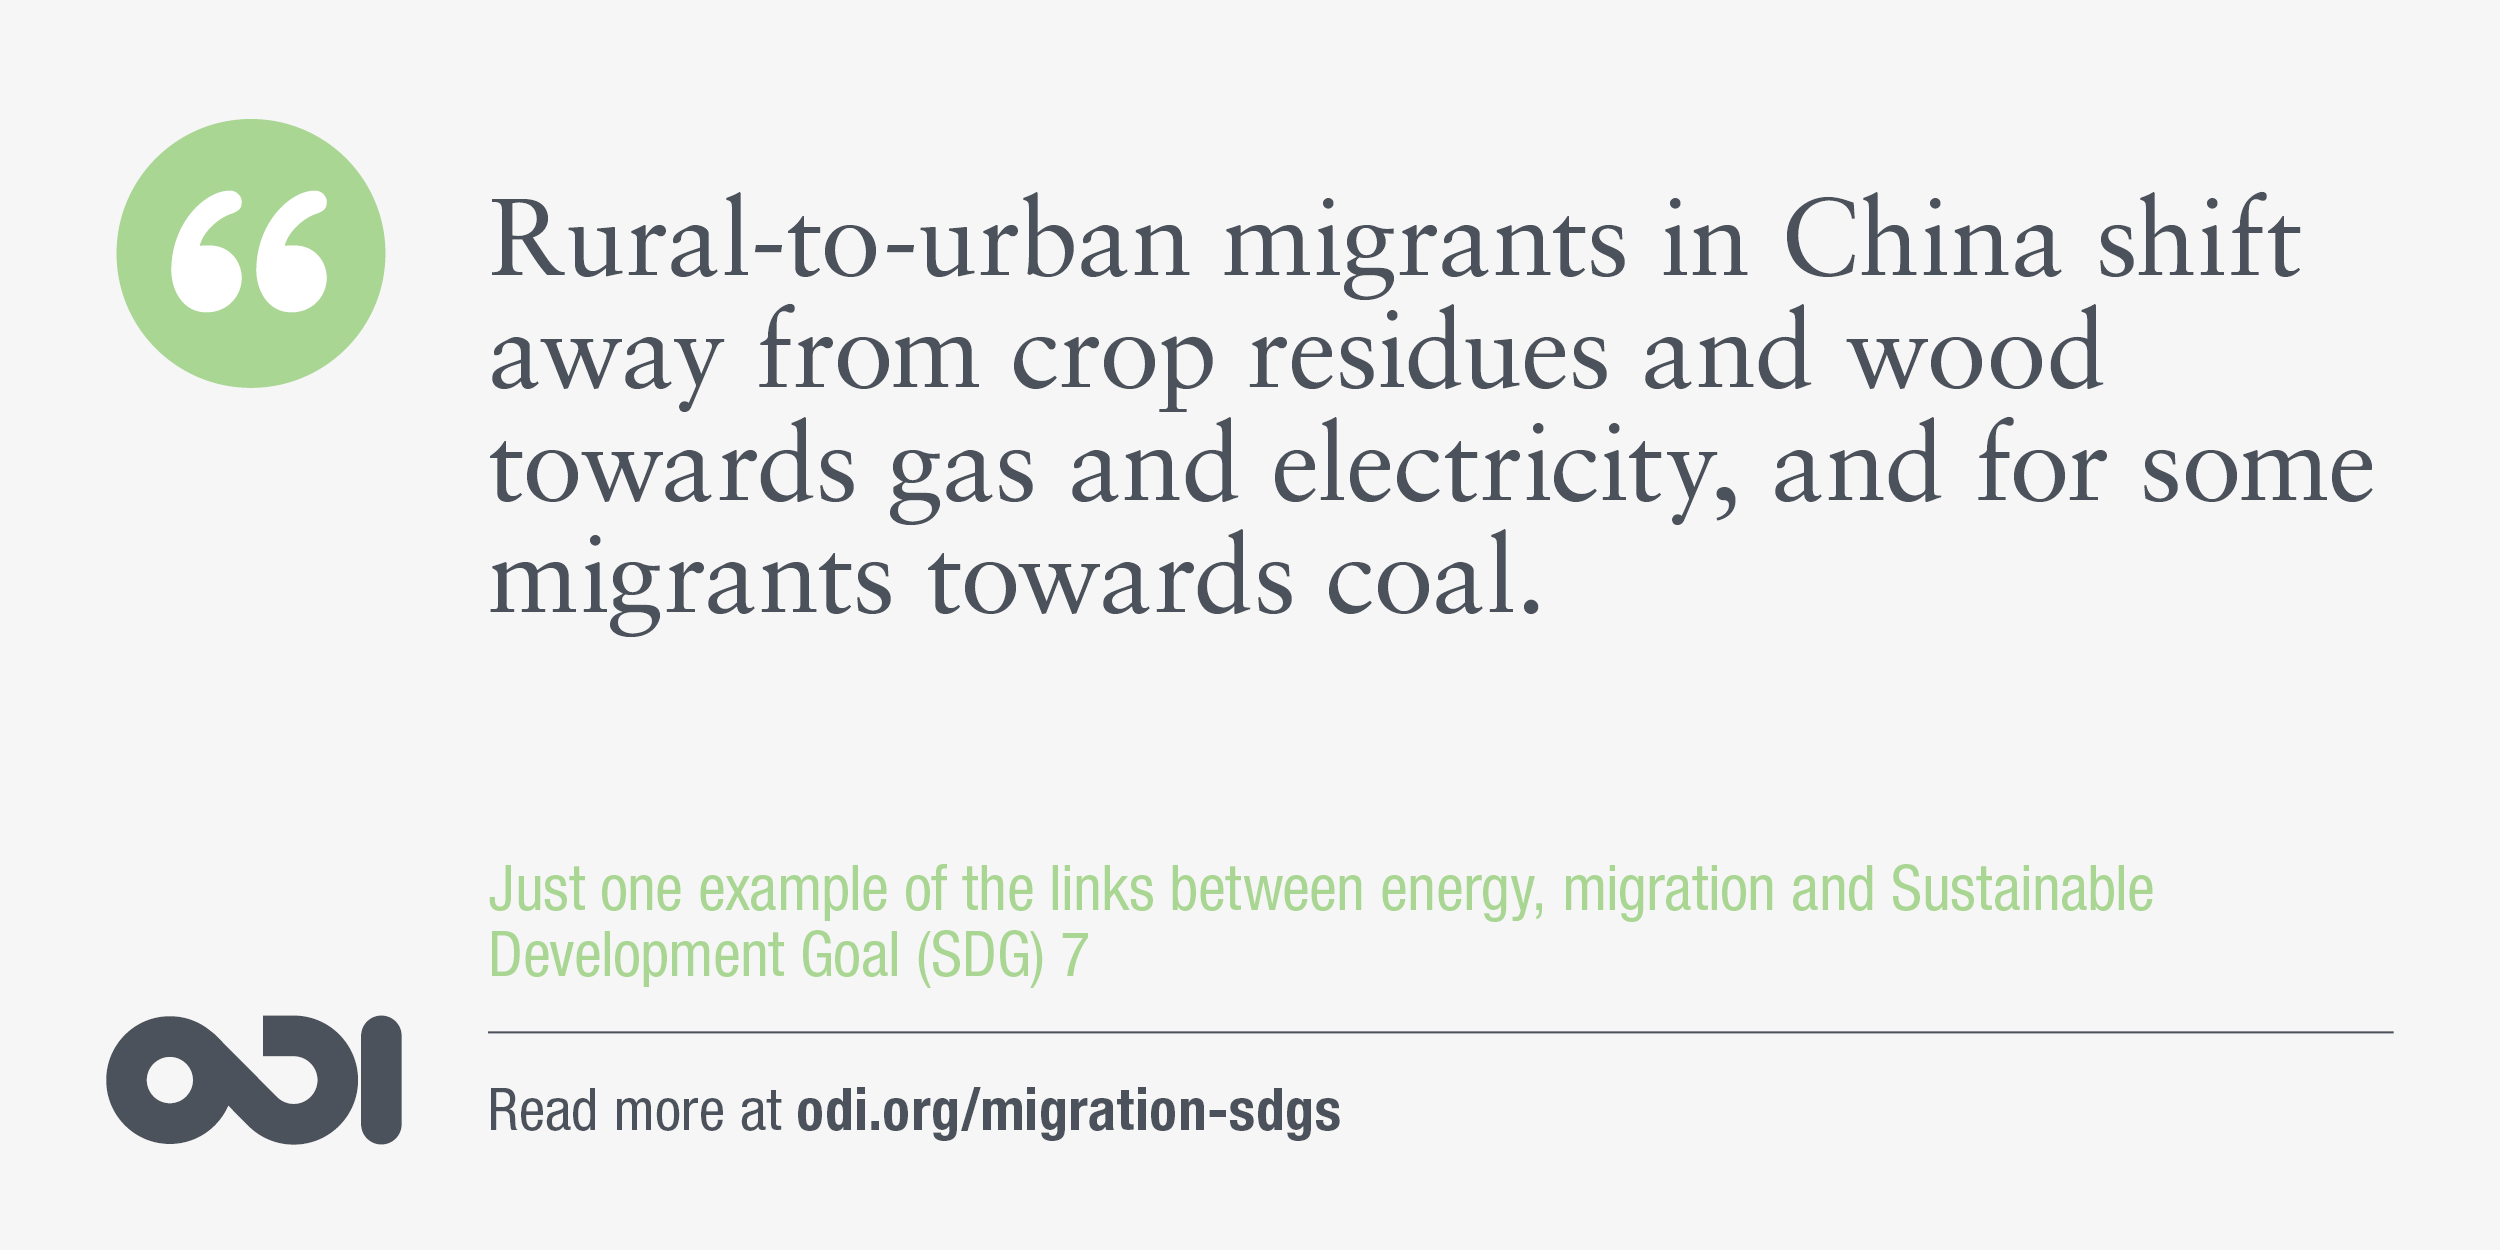 The links between energy, migration and SDG 7.